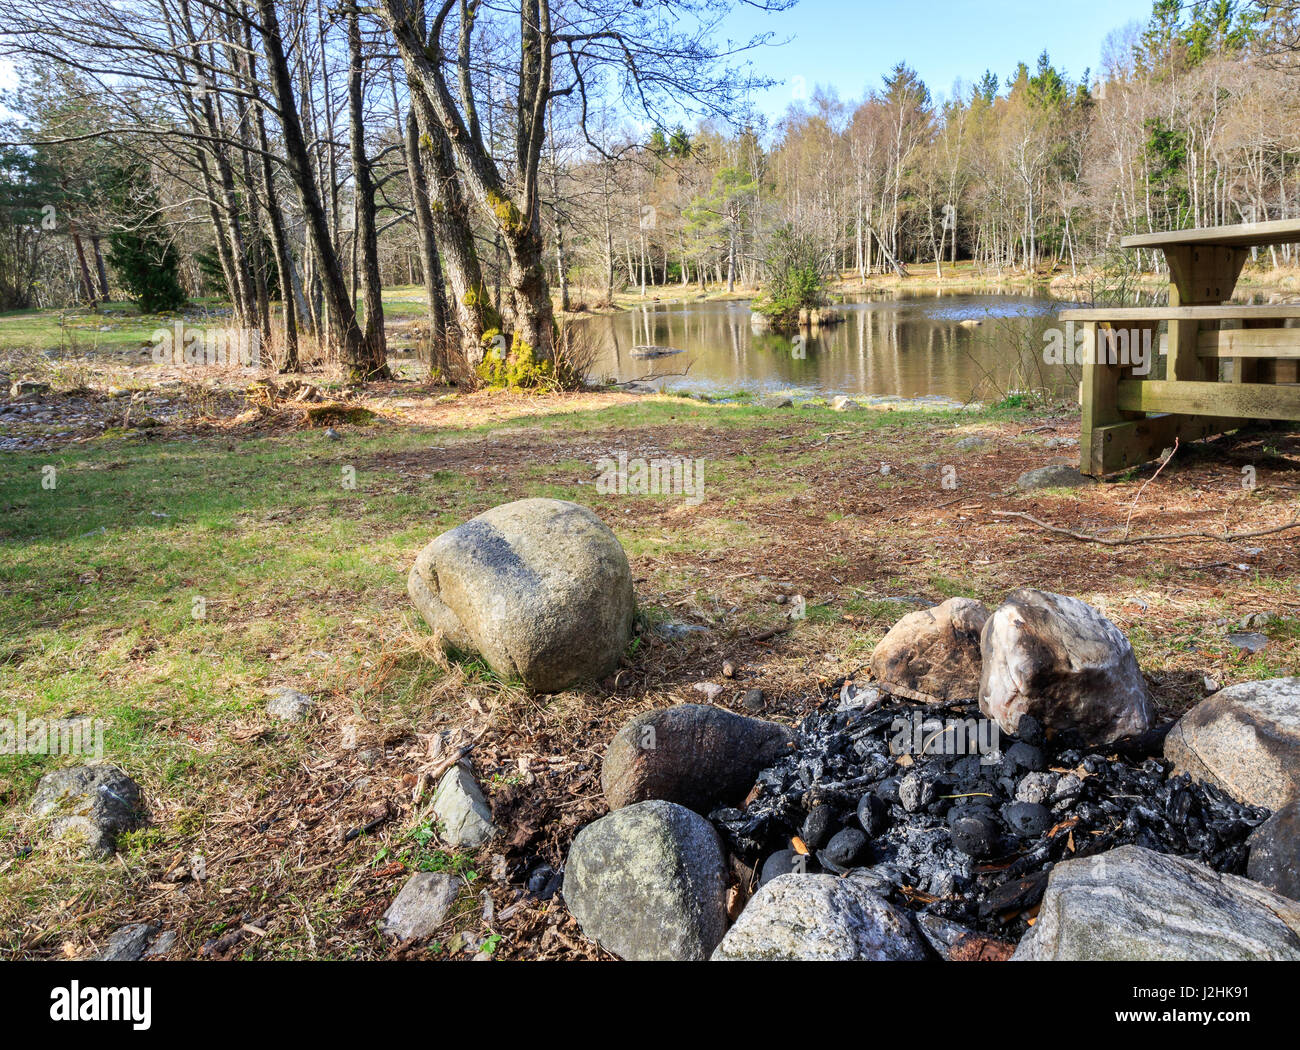 Small lake with campfire and bench in Jomfruland National Park, Kragero, Norway. Jomfruland, meaning Virgin Land in Norwegian, is part of Raet, a big  Stock Photo